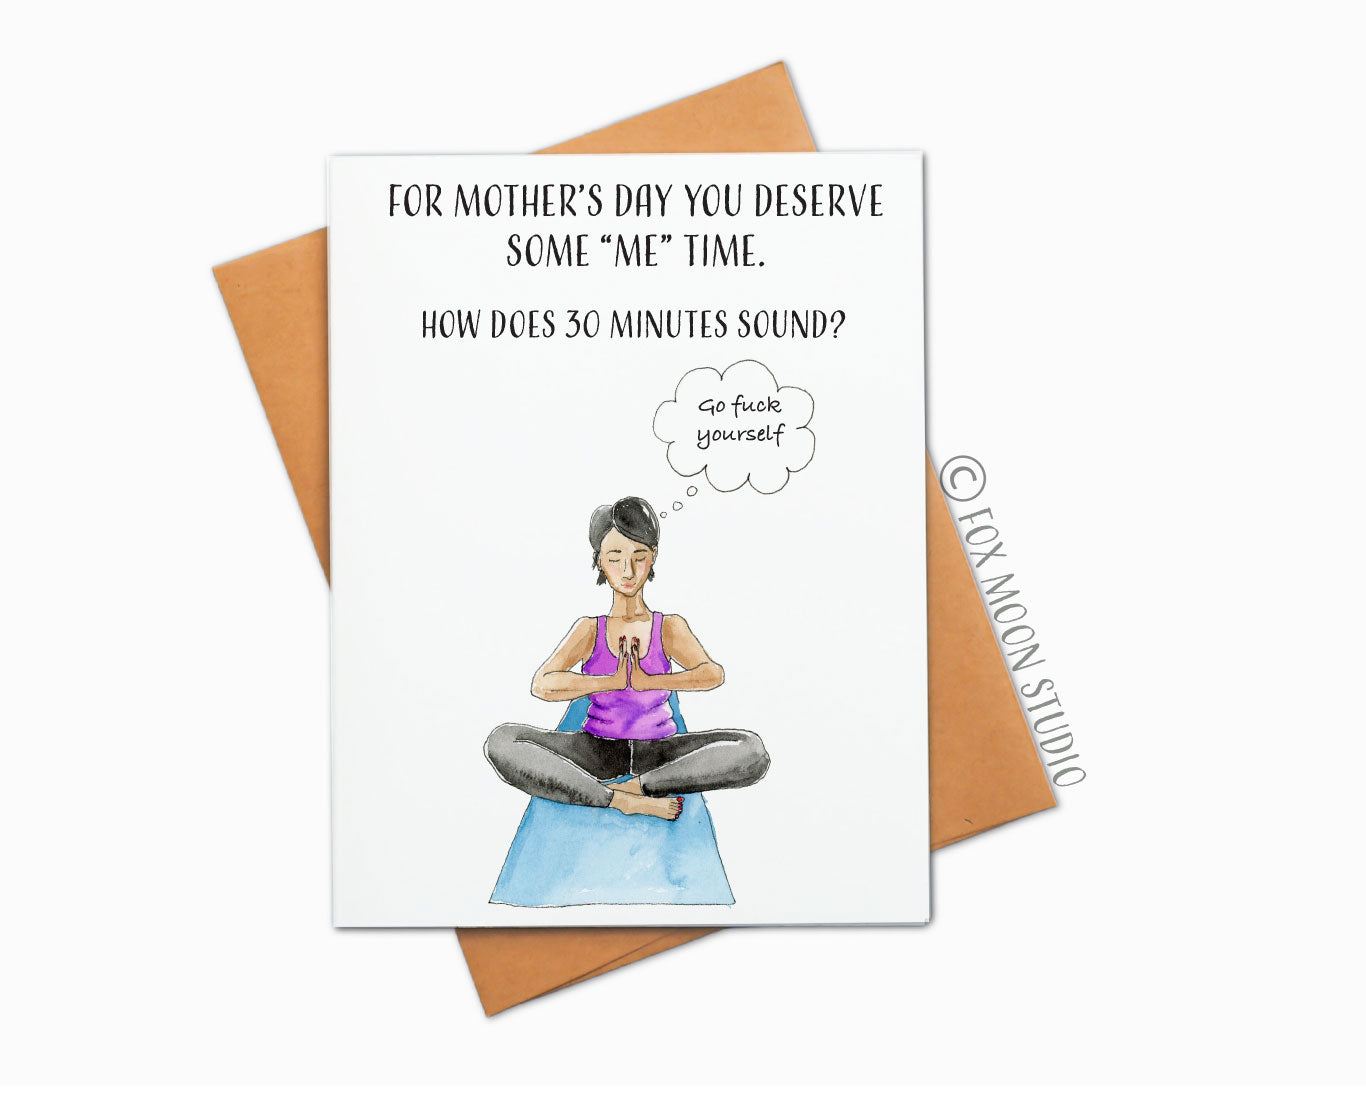 For Mother's Day You Deserve Some "Me" Time. How Does 30 Minutes Sound? - Mother's Day Greeting Card